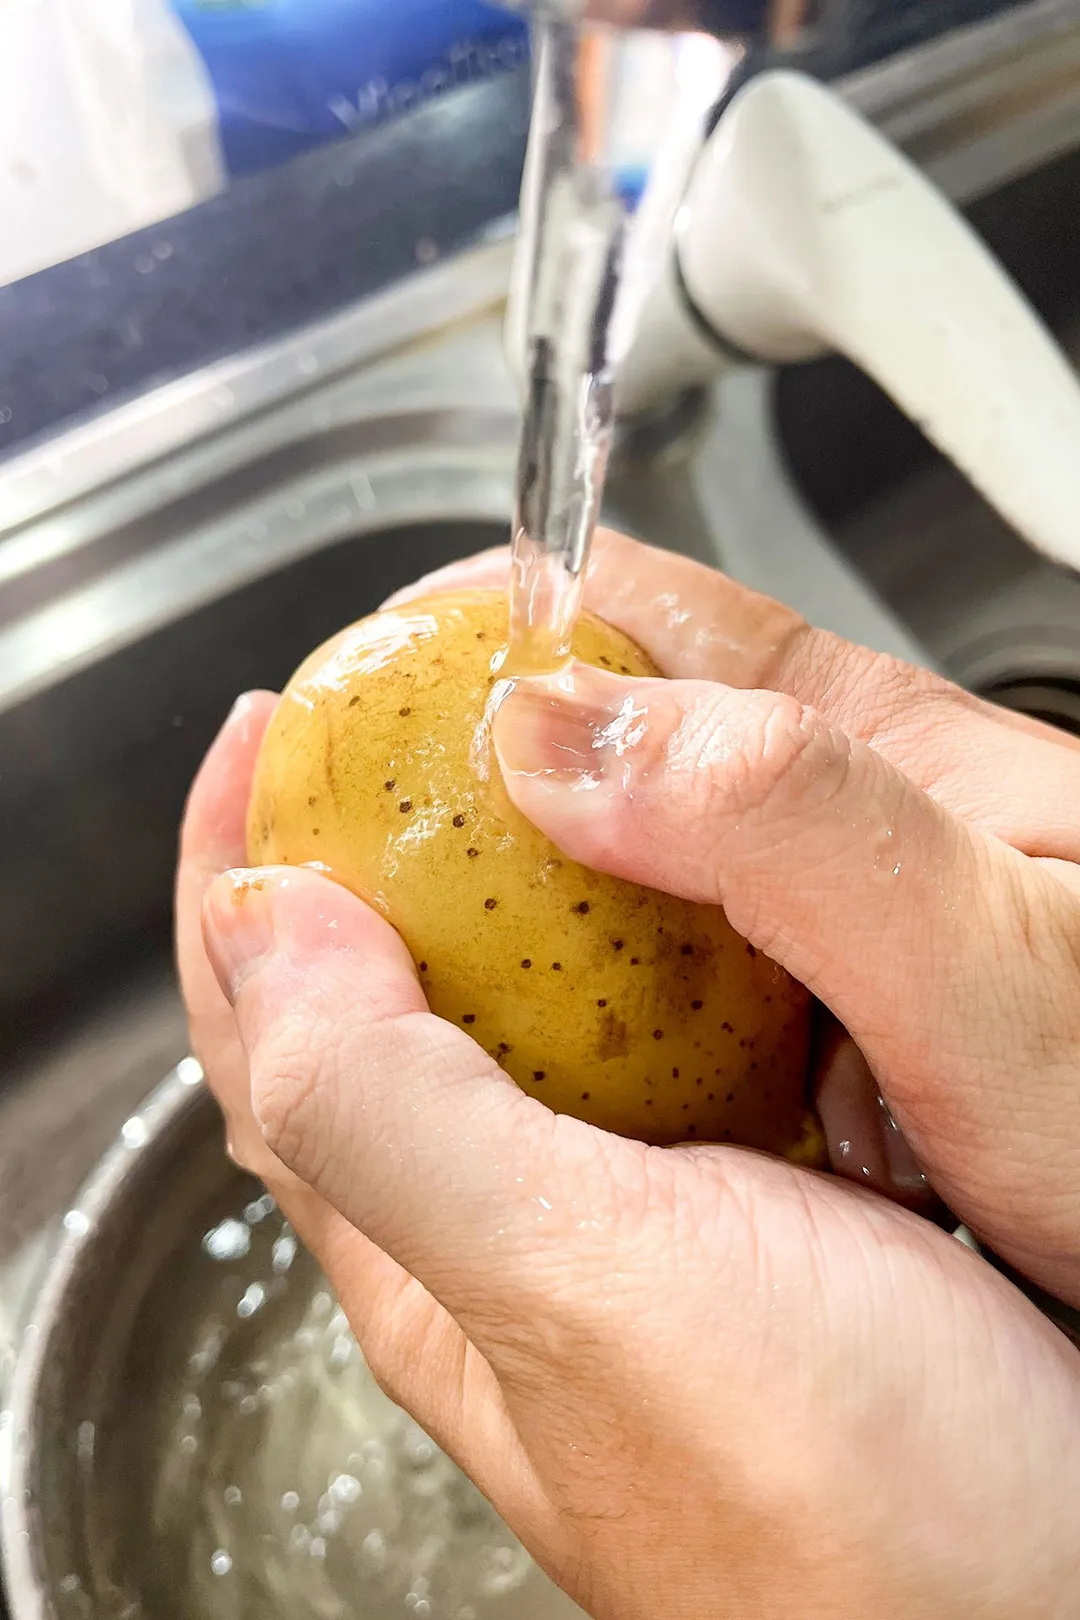 two hand holding and wash a potato